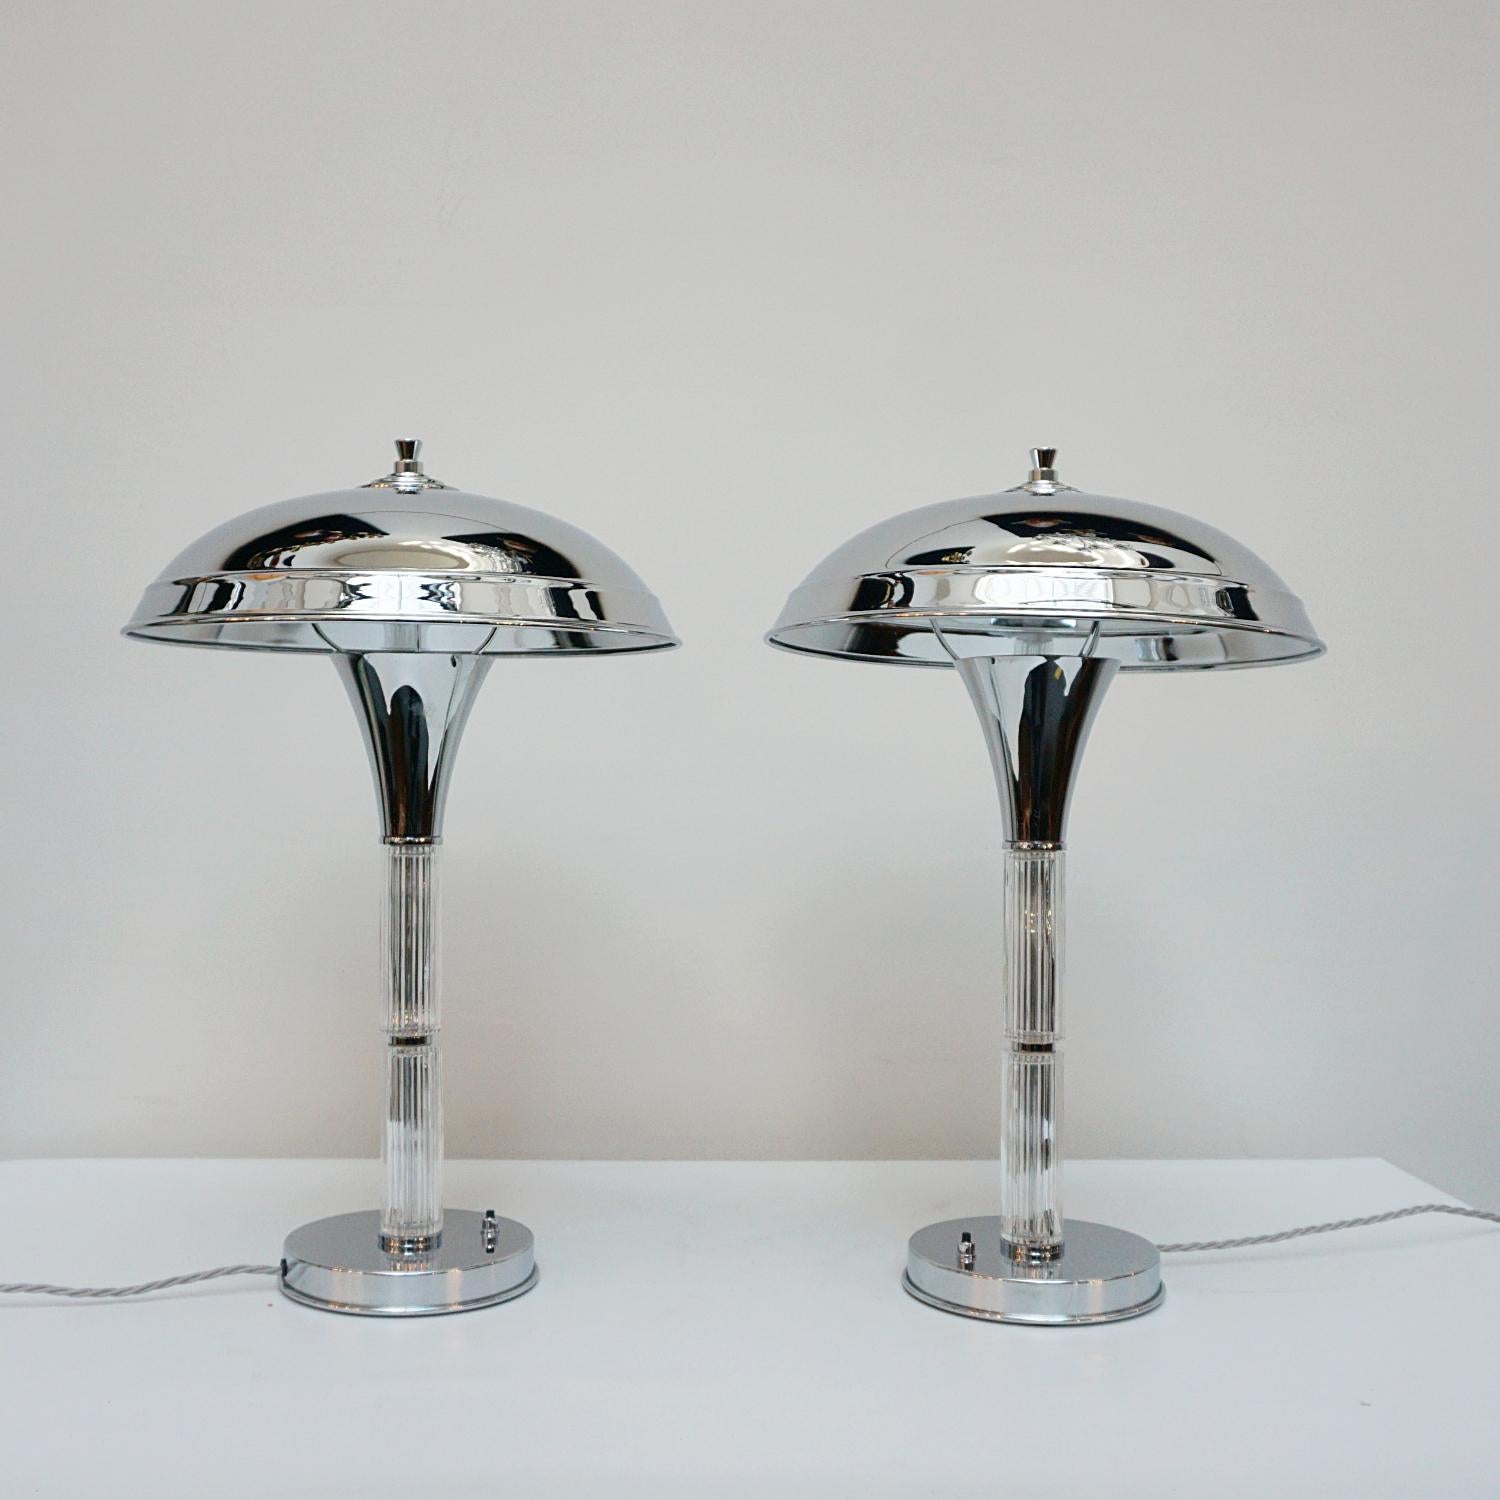 A pair of Art Deco style dome lamps. Glass rod stem double height stem, set over a chromed metal circular base and a chromed metal shade. Chrome finial to top. 

Dimensions: H 55m W 16cm

Origin: English

Item Number: J303

All of our lighting is